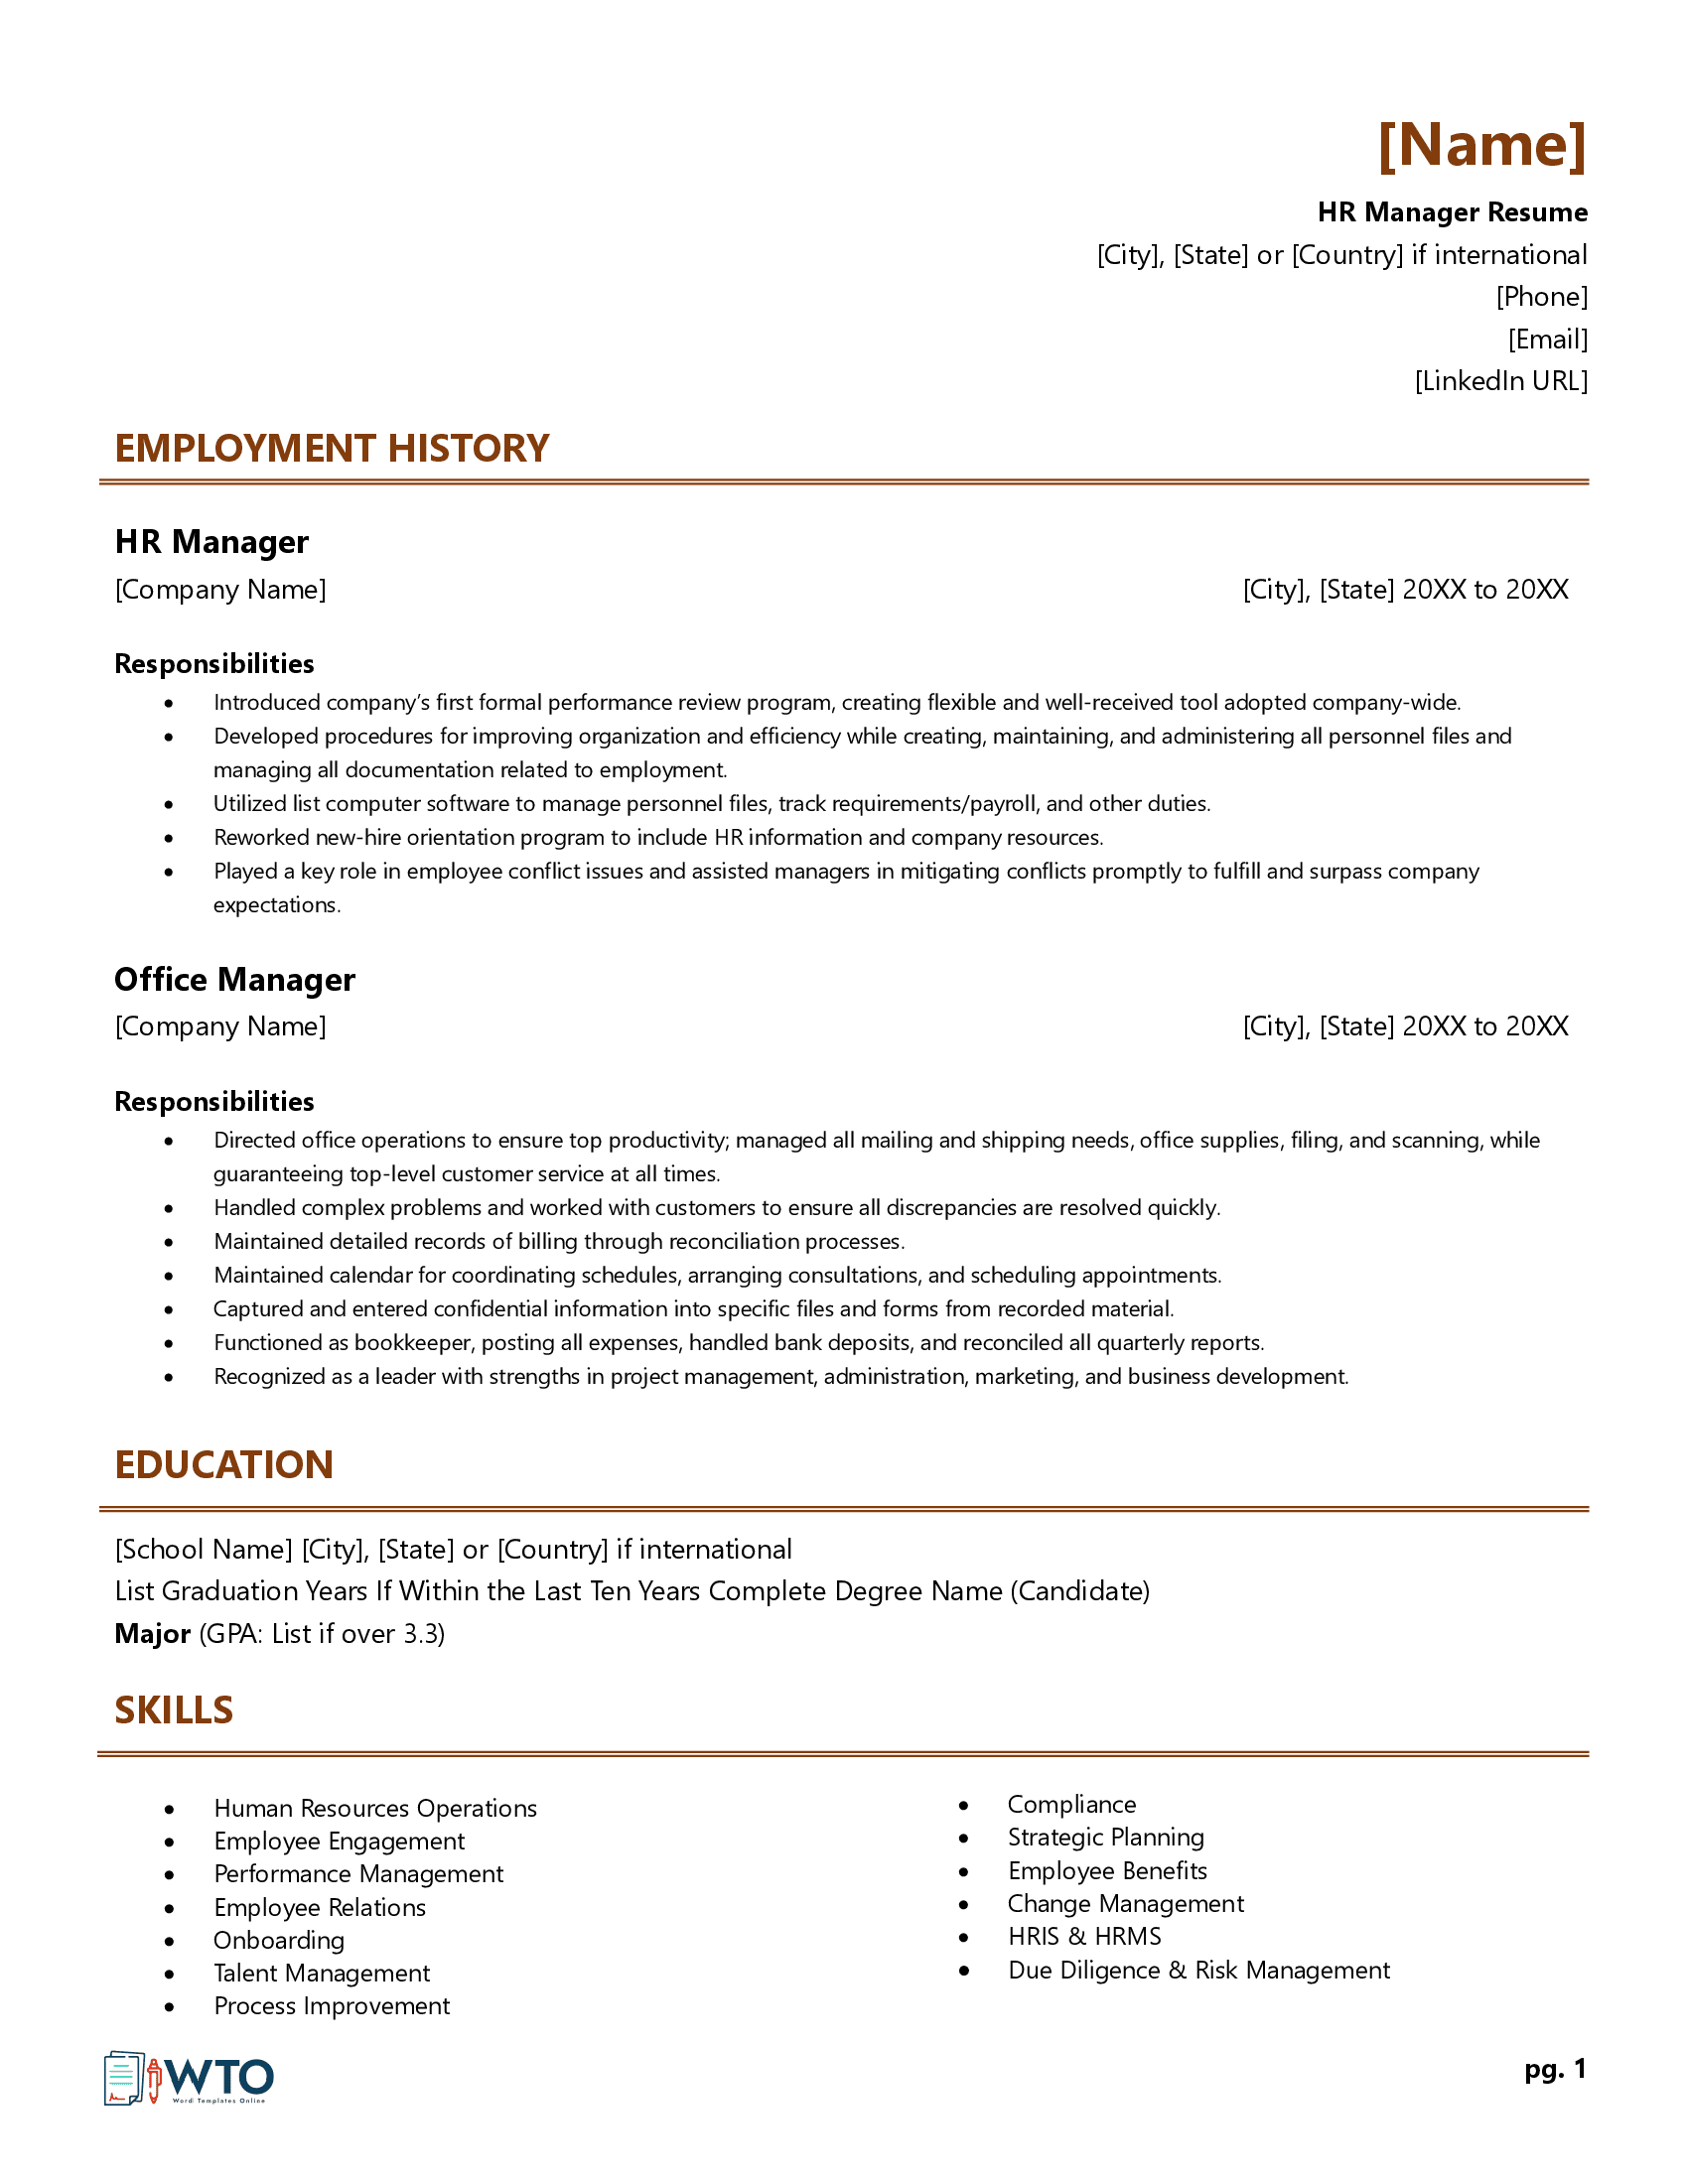 HR Manager Resume Template - Customizable Format